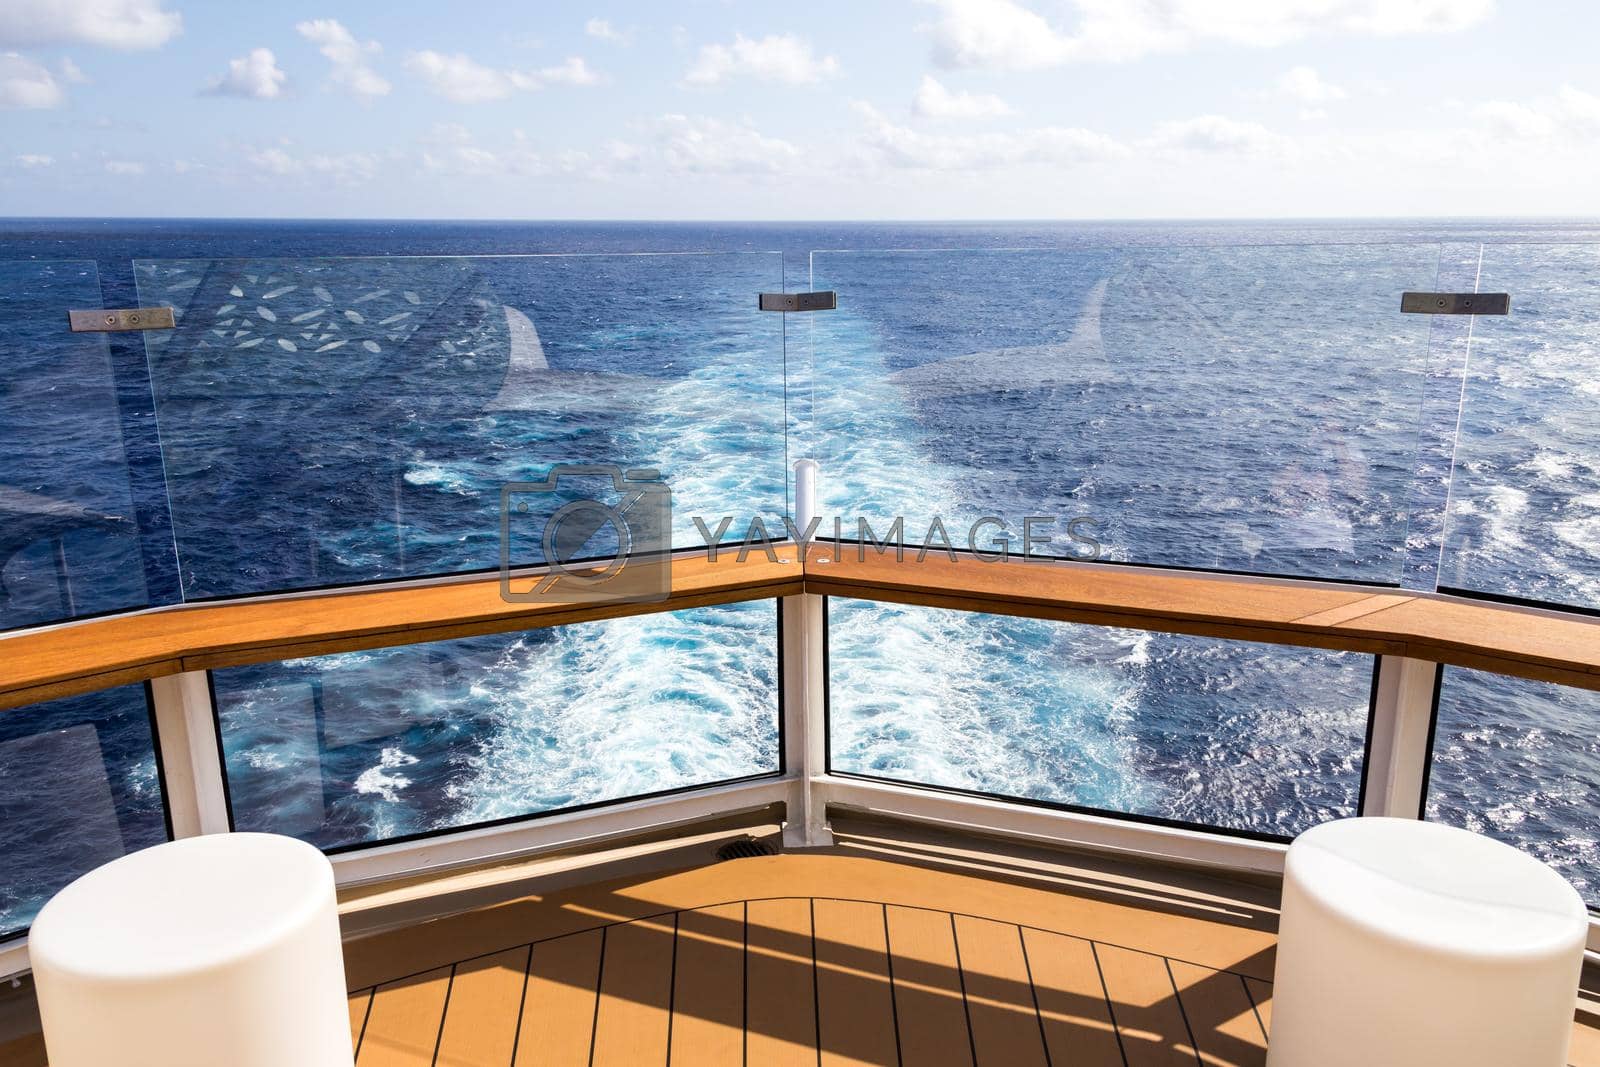 Deck of cruise ship with wake or trail on ocean surface, white trace